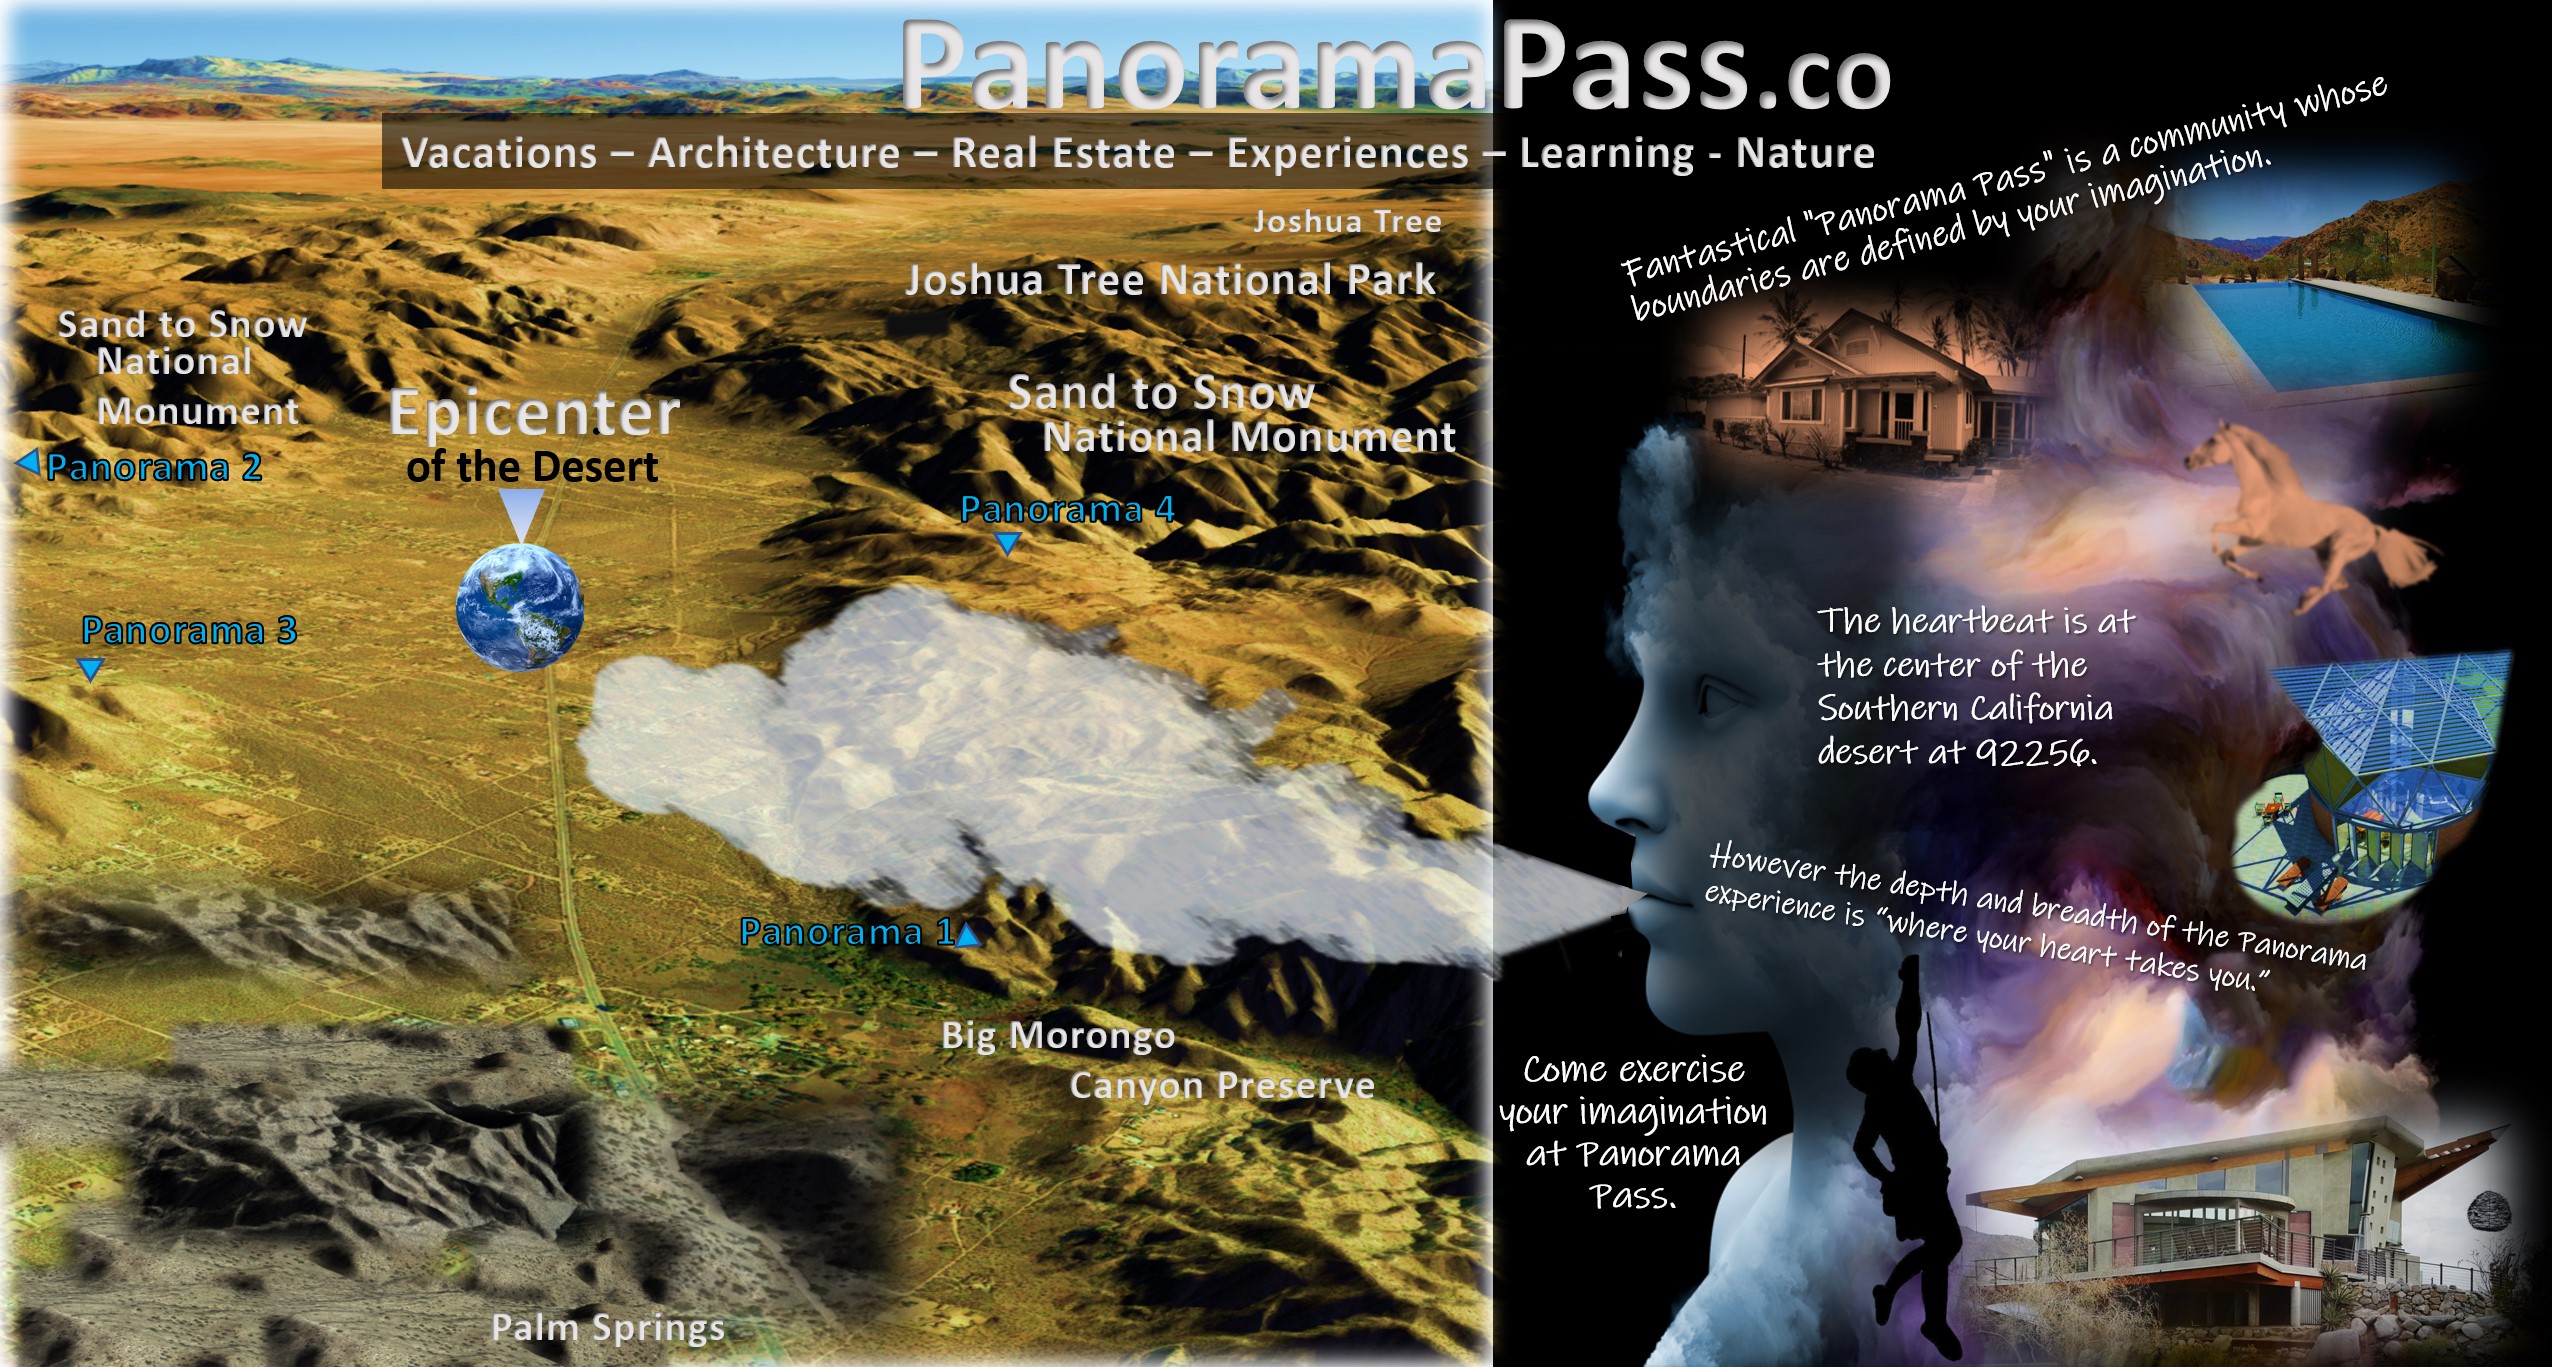 Head and Map - Cover photo